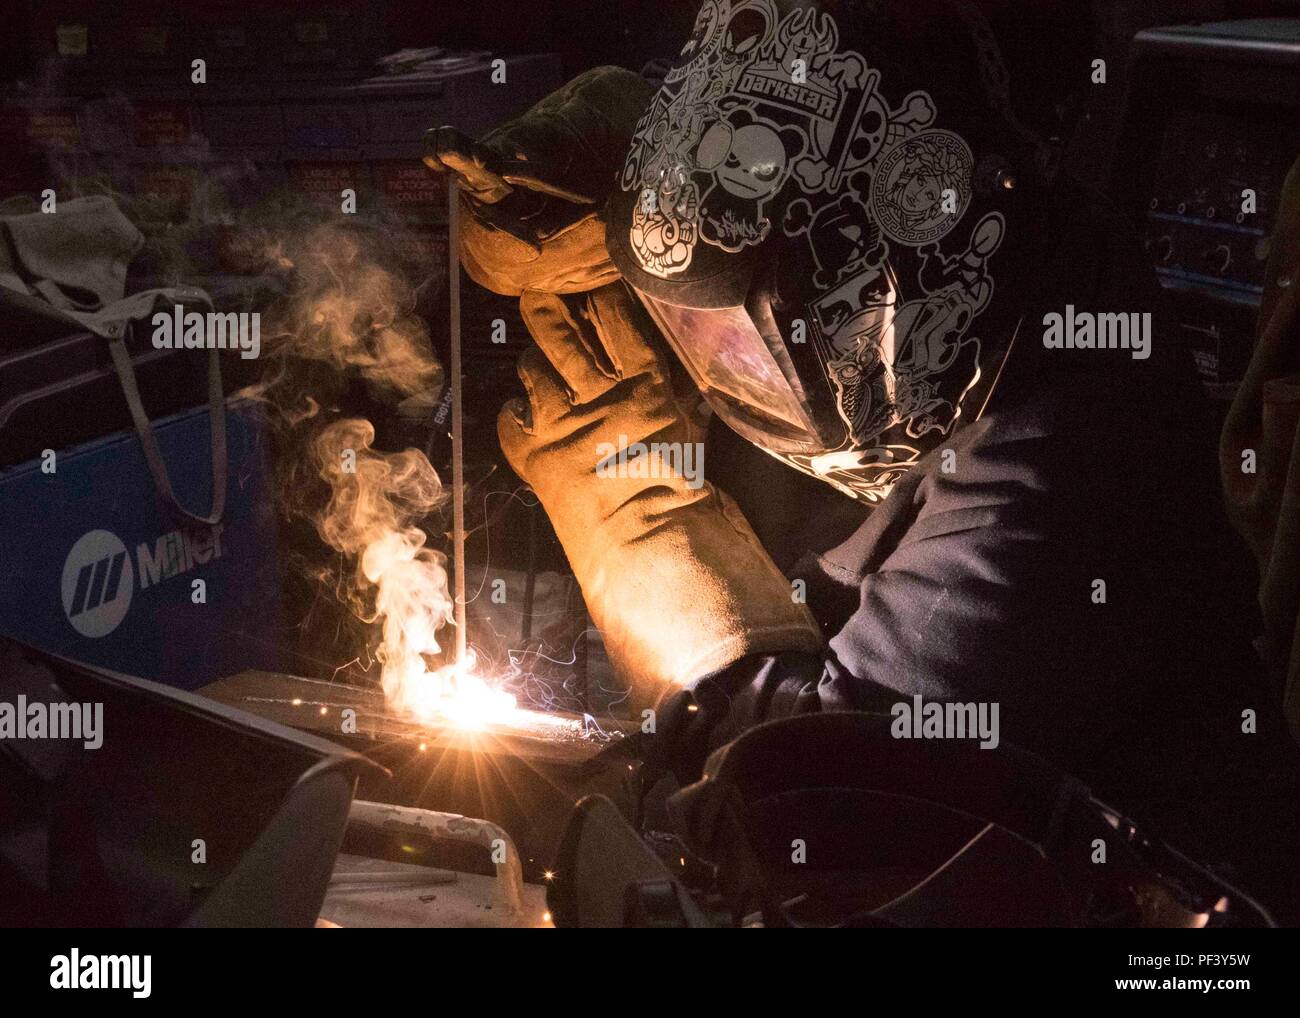 180814-N-MY760-152   PORTSMOUTH, Va. (Aug. 14, 2018) Hull Maintenance Technician Fireman Keriyate Lewis, from New Iberia, La., welds a metal brace aboard the aircraft carrier USS Dwight D. Eisenhower (CVN 69)(Ike). Ike is undergoing a Planned Incremental Availability (PIA) at Norfolk Naval Shipyard during the maintenance phase of the Optimized Fleet Response Plan (OFRP). (U.S. Navy photo by Mass Communication Specialist Seaman Apprentice Tyler Miller) Stock Photo